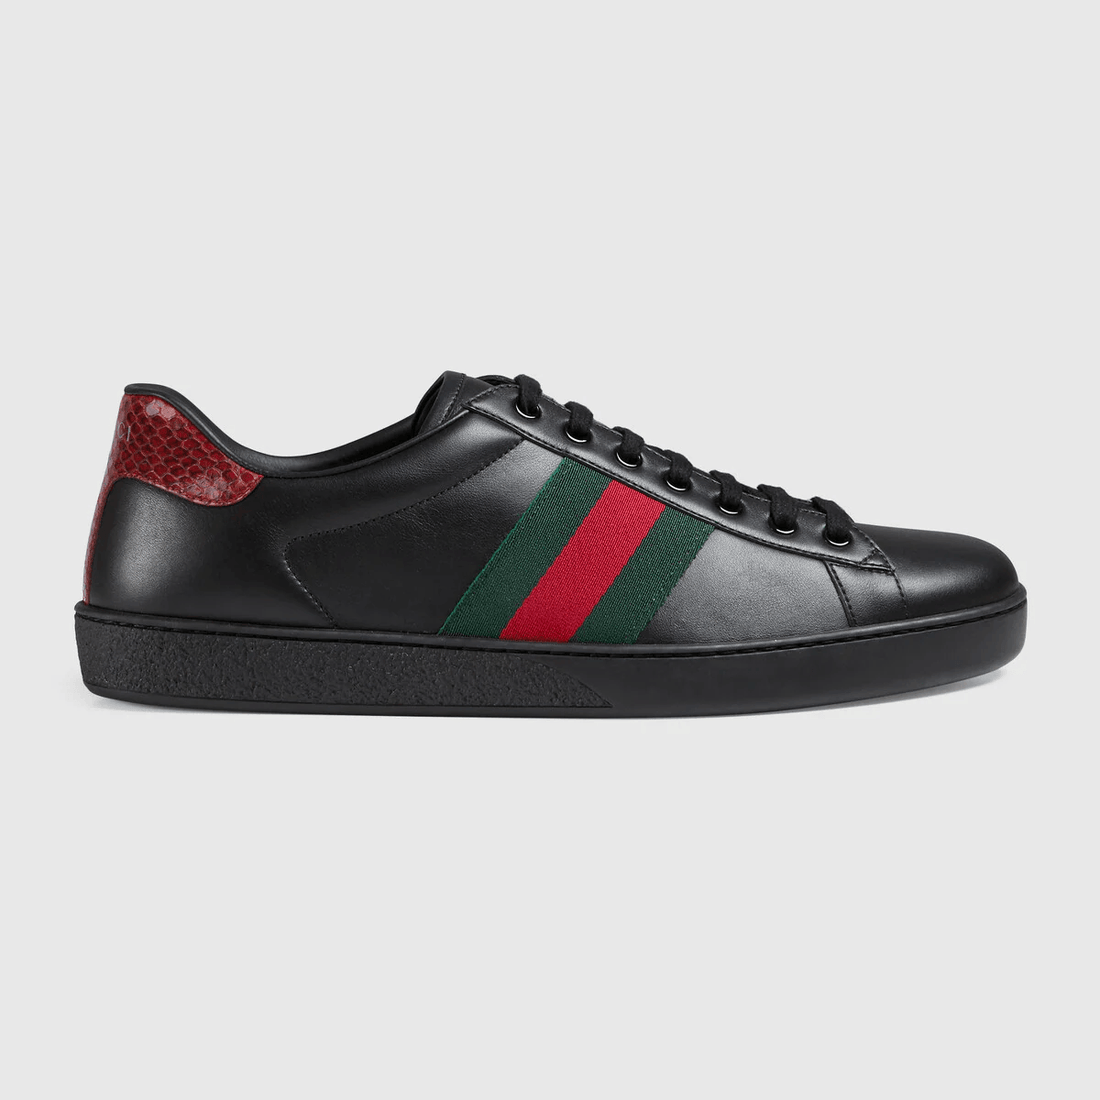 Gucci Ace Black Leather - VIARESELL